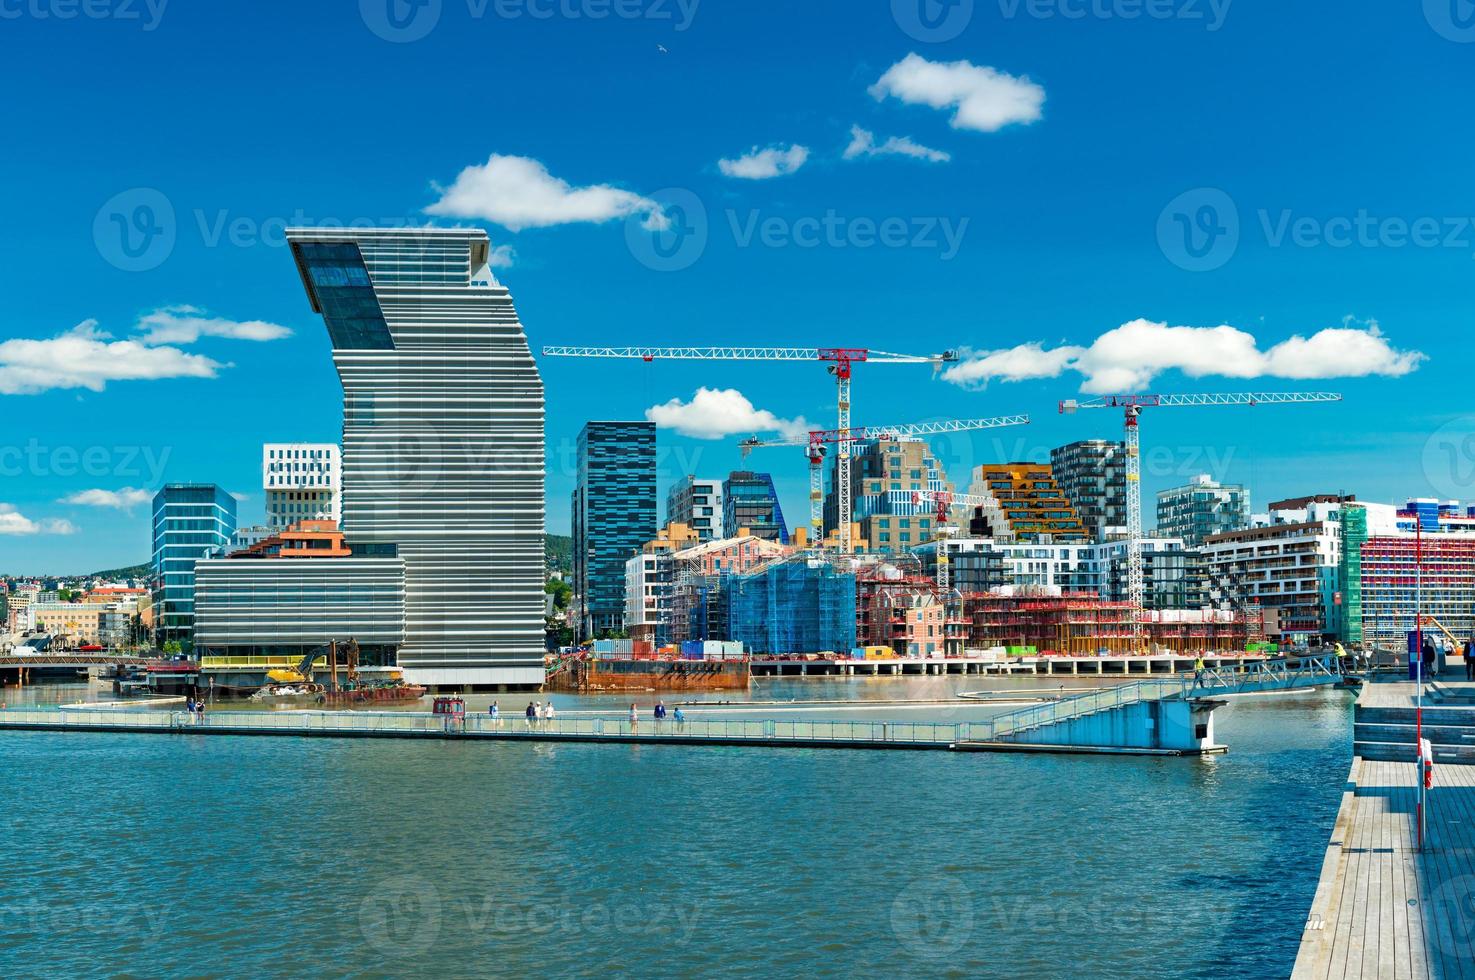 Cityscape of Oslo with modern architecture, buildings under construction, tower cranes, harbor and bridge with walking people, Norway photo